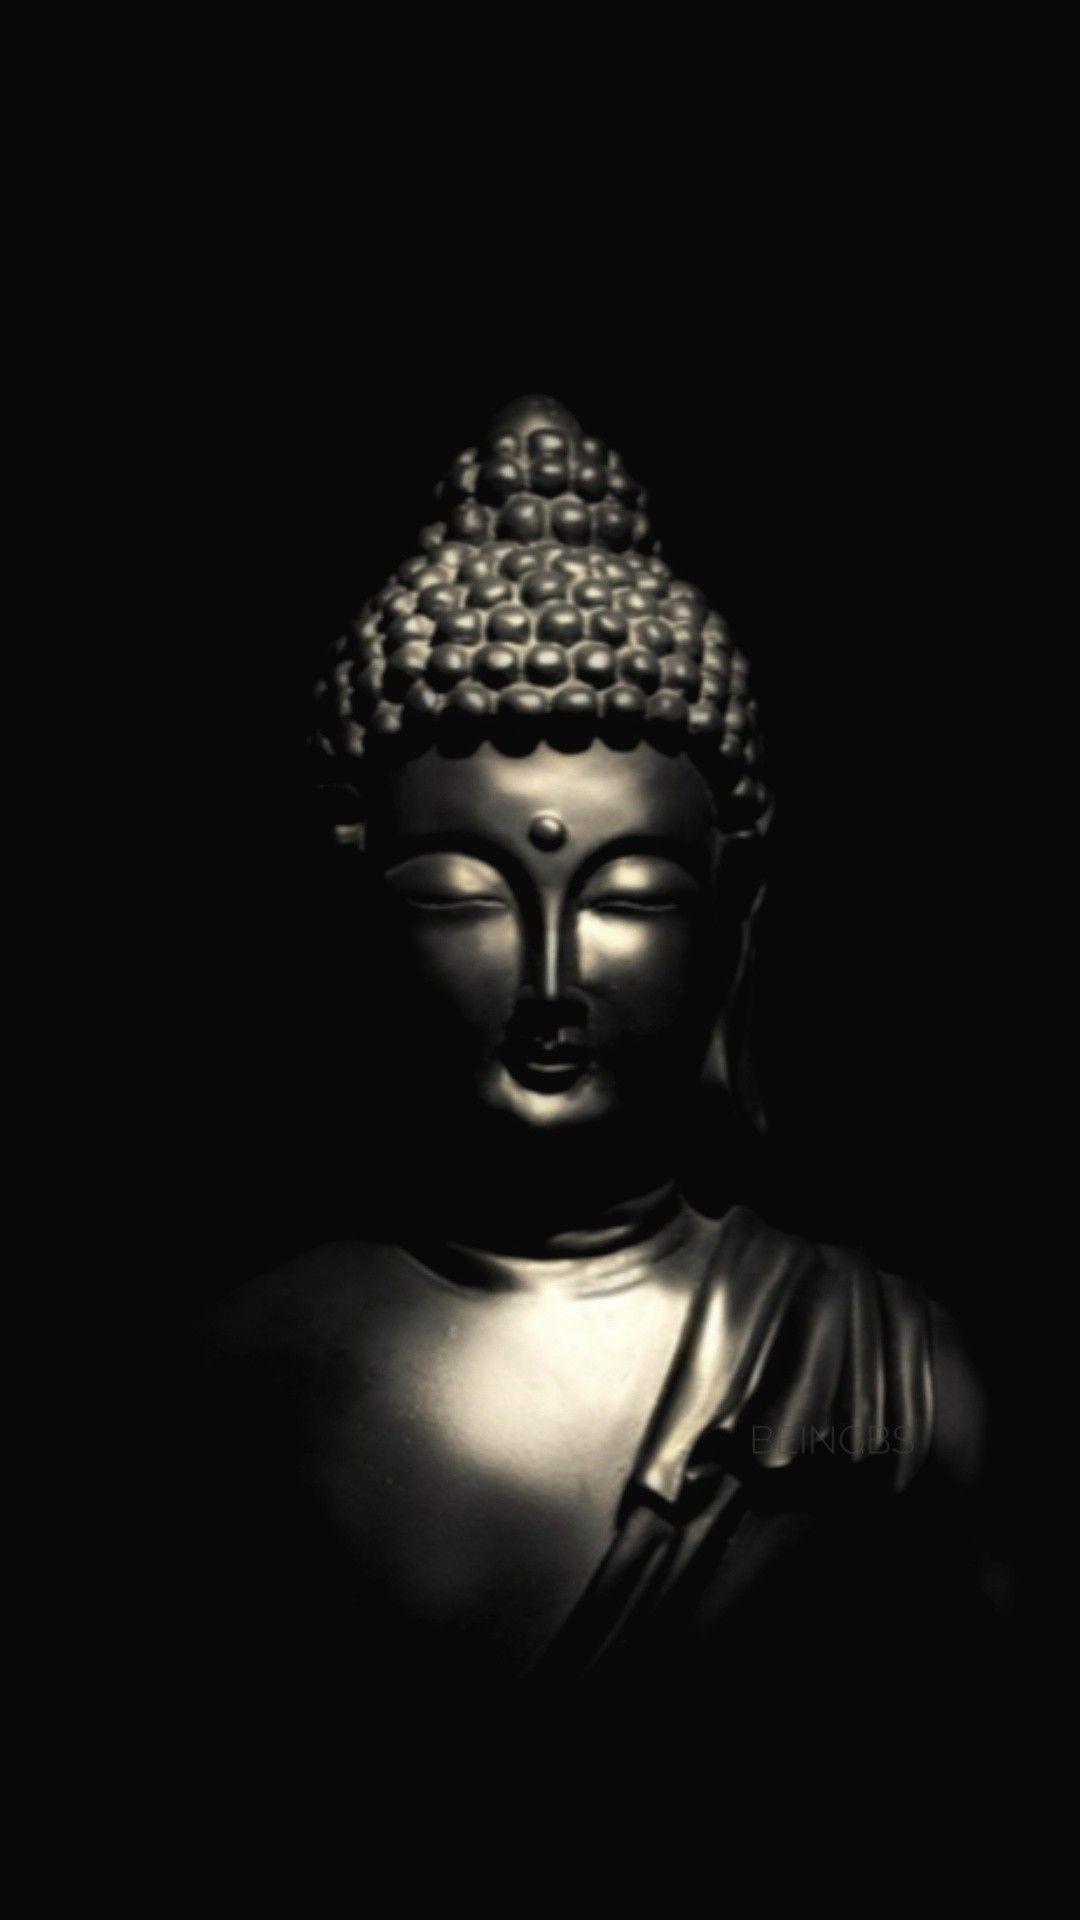 500 Black And Gold Buddha Wallpapers  Background Beautiful Best Available  For Download Black And Gold Buddha Images Free On Zicxacomphotos  Zicxa  Photos